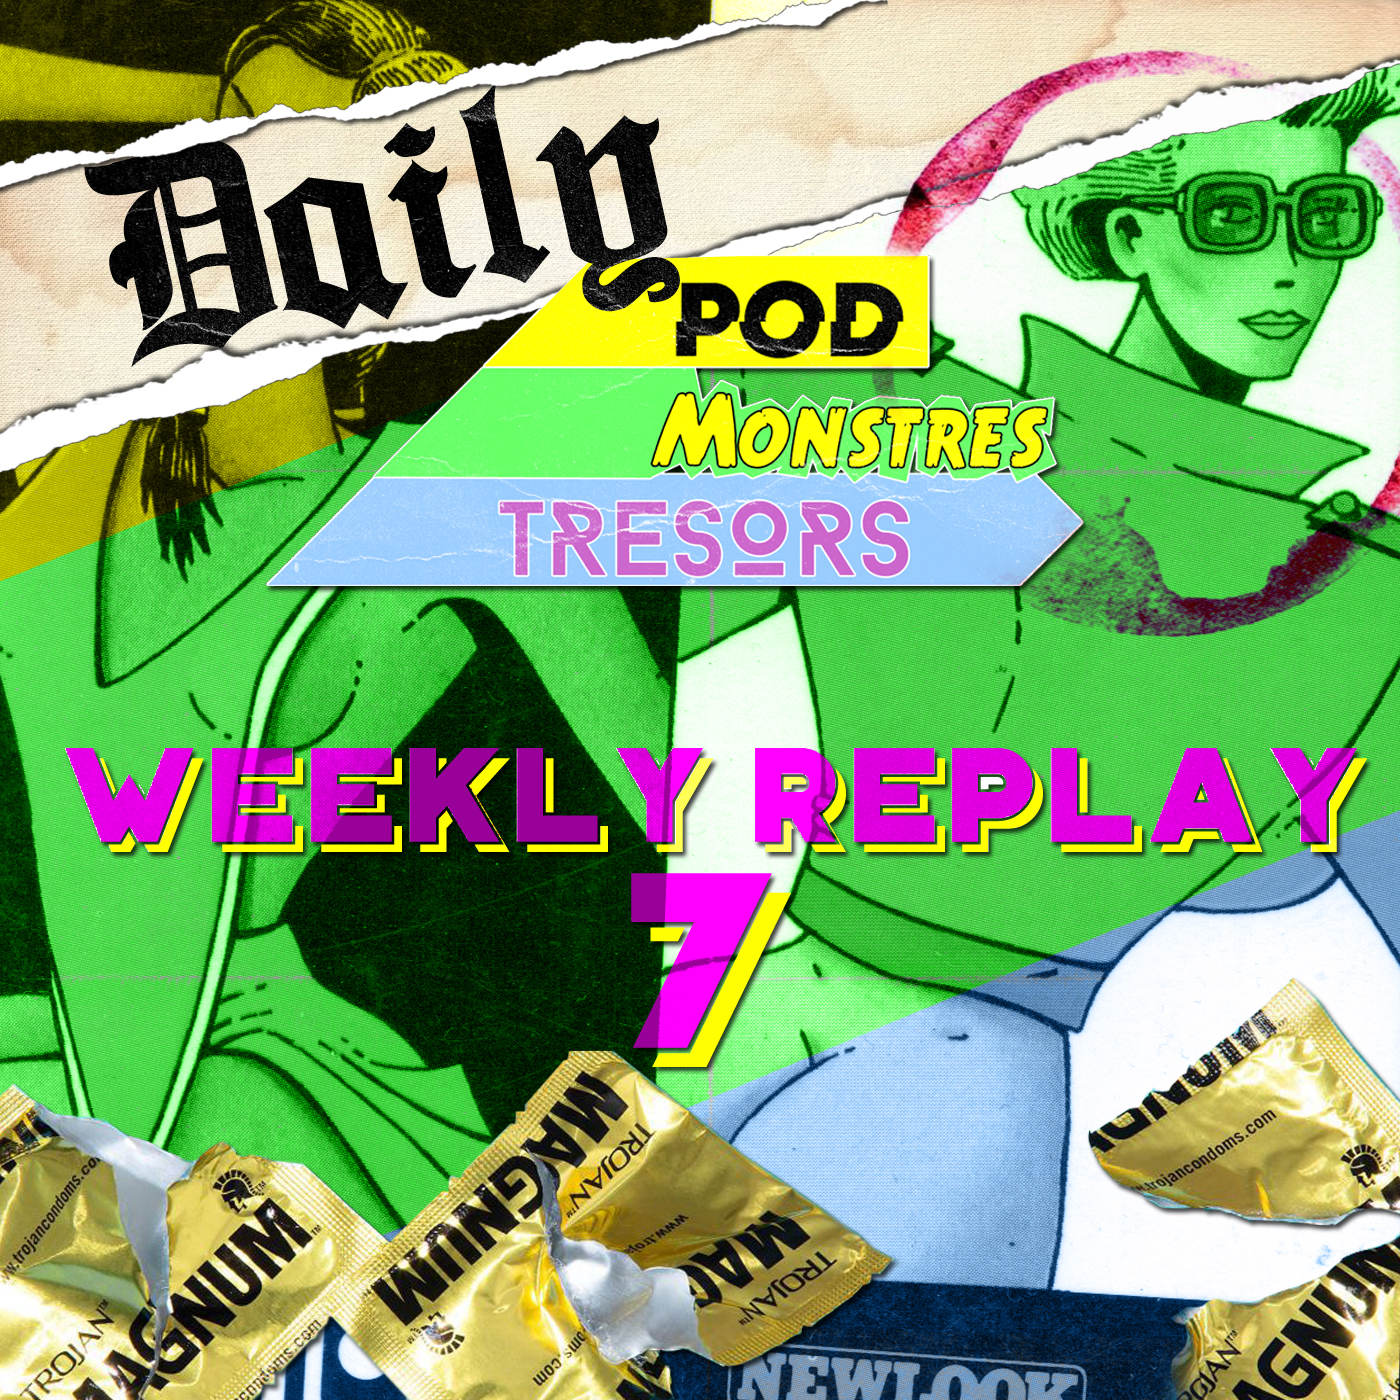 Daily Pod Monstres Trésors : Mexico Melody – Le Weekly Replay 7